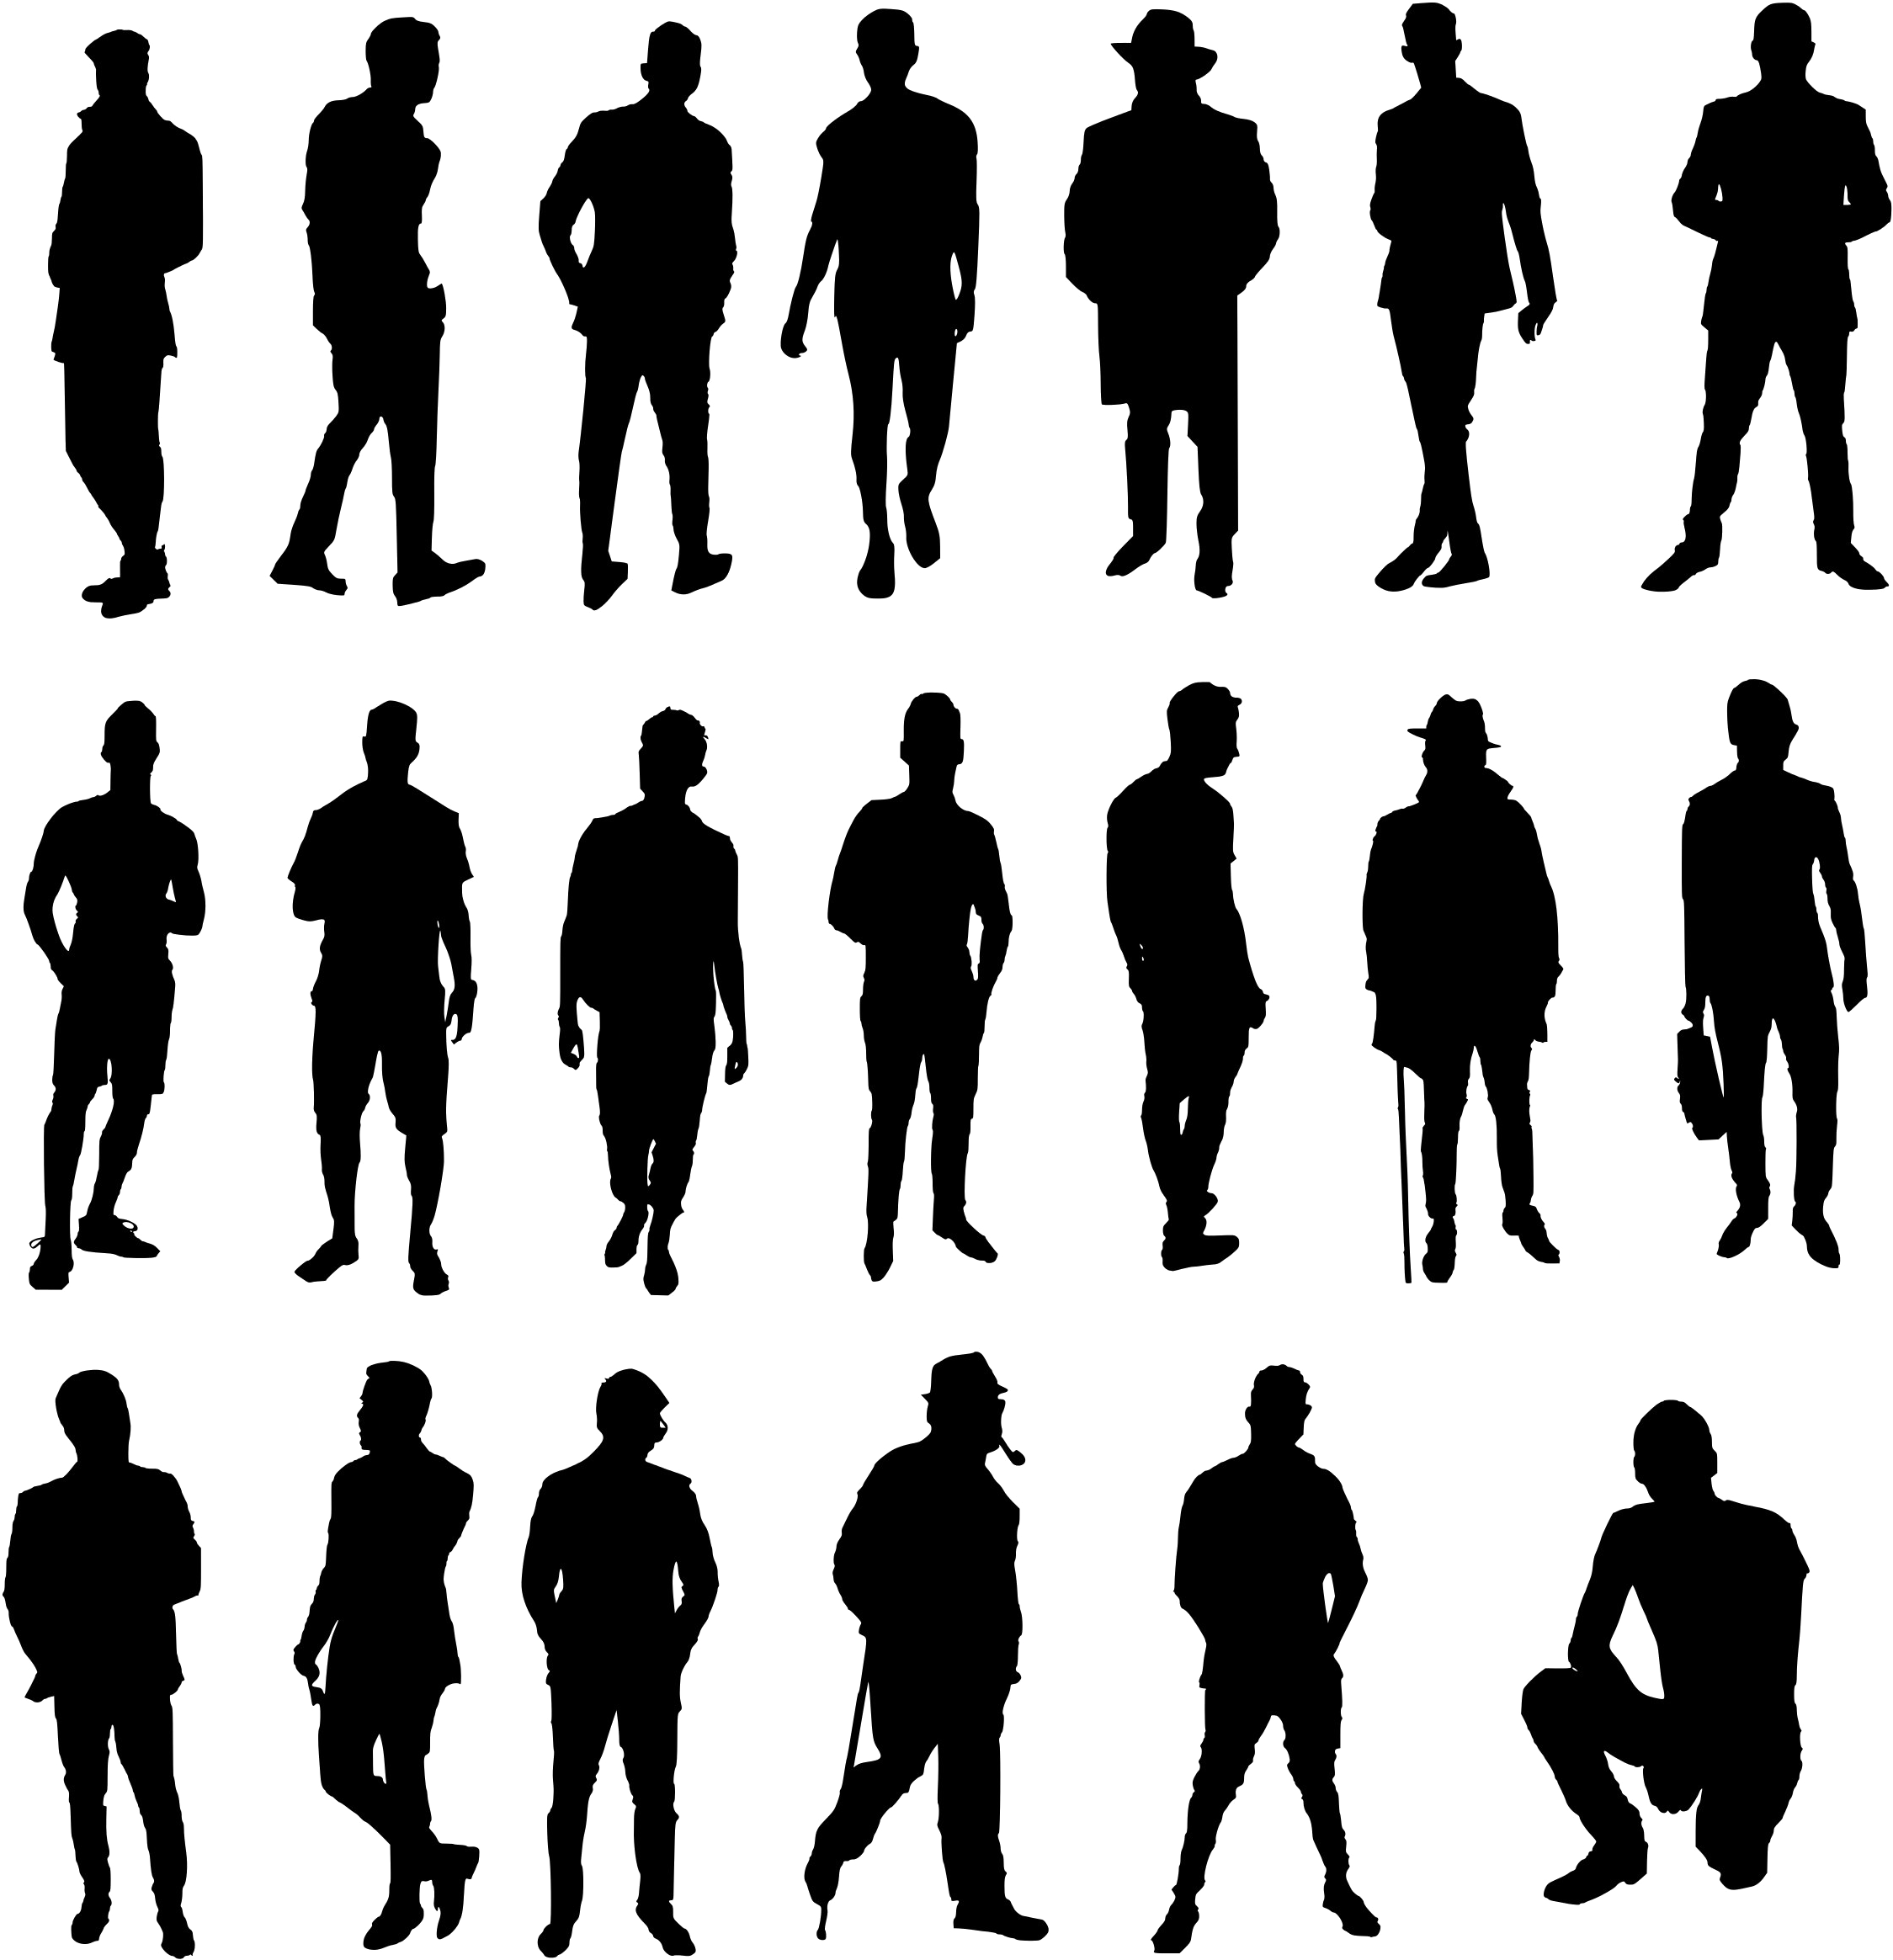 Clip Arts Related To : Silhouette Human body Woman Clip art - Silhouette pn...